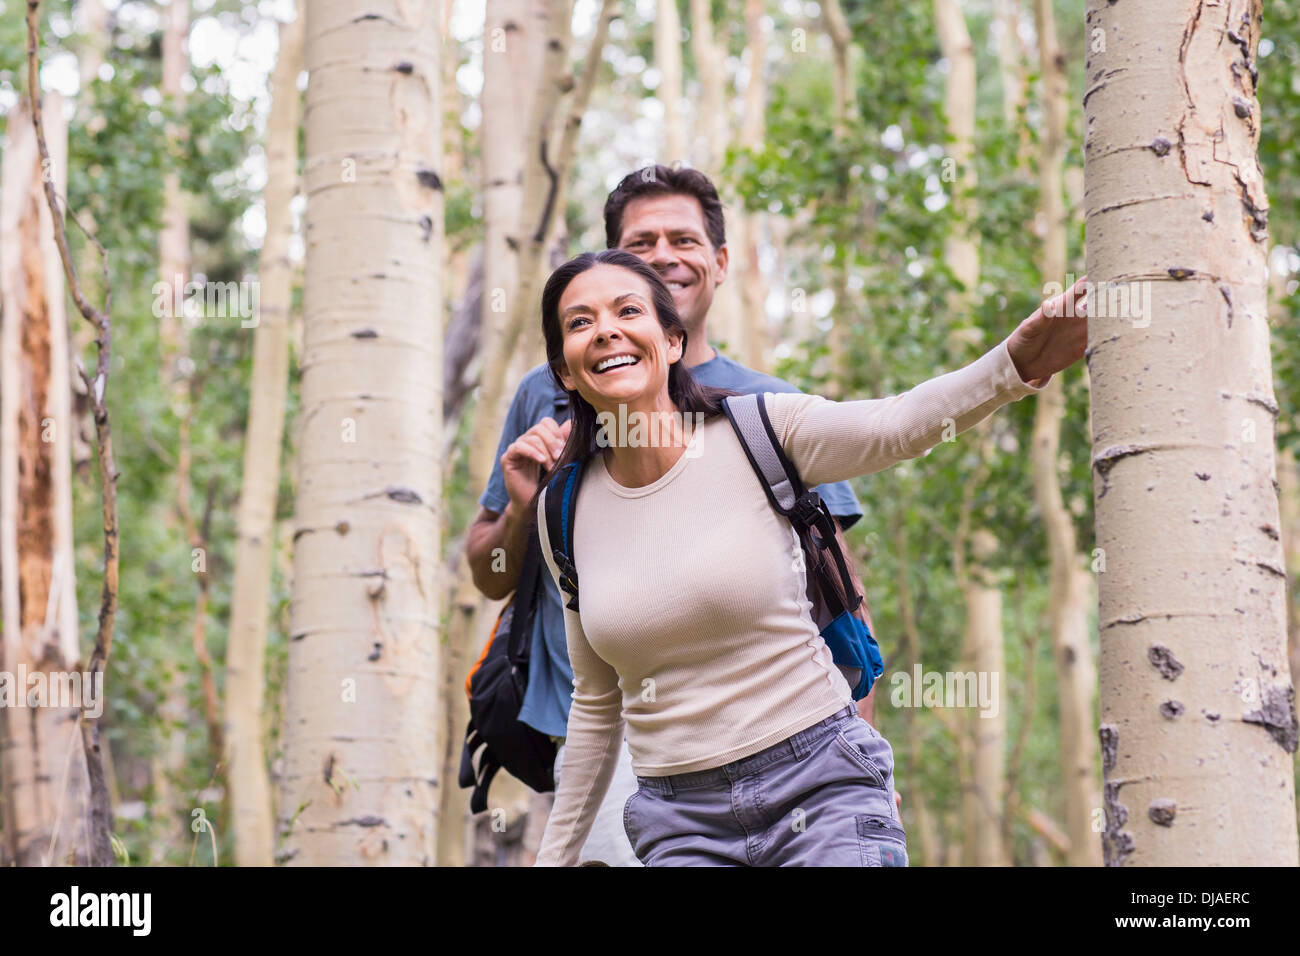 Couple walking together in forest Stock Photo